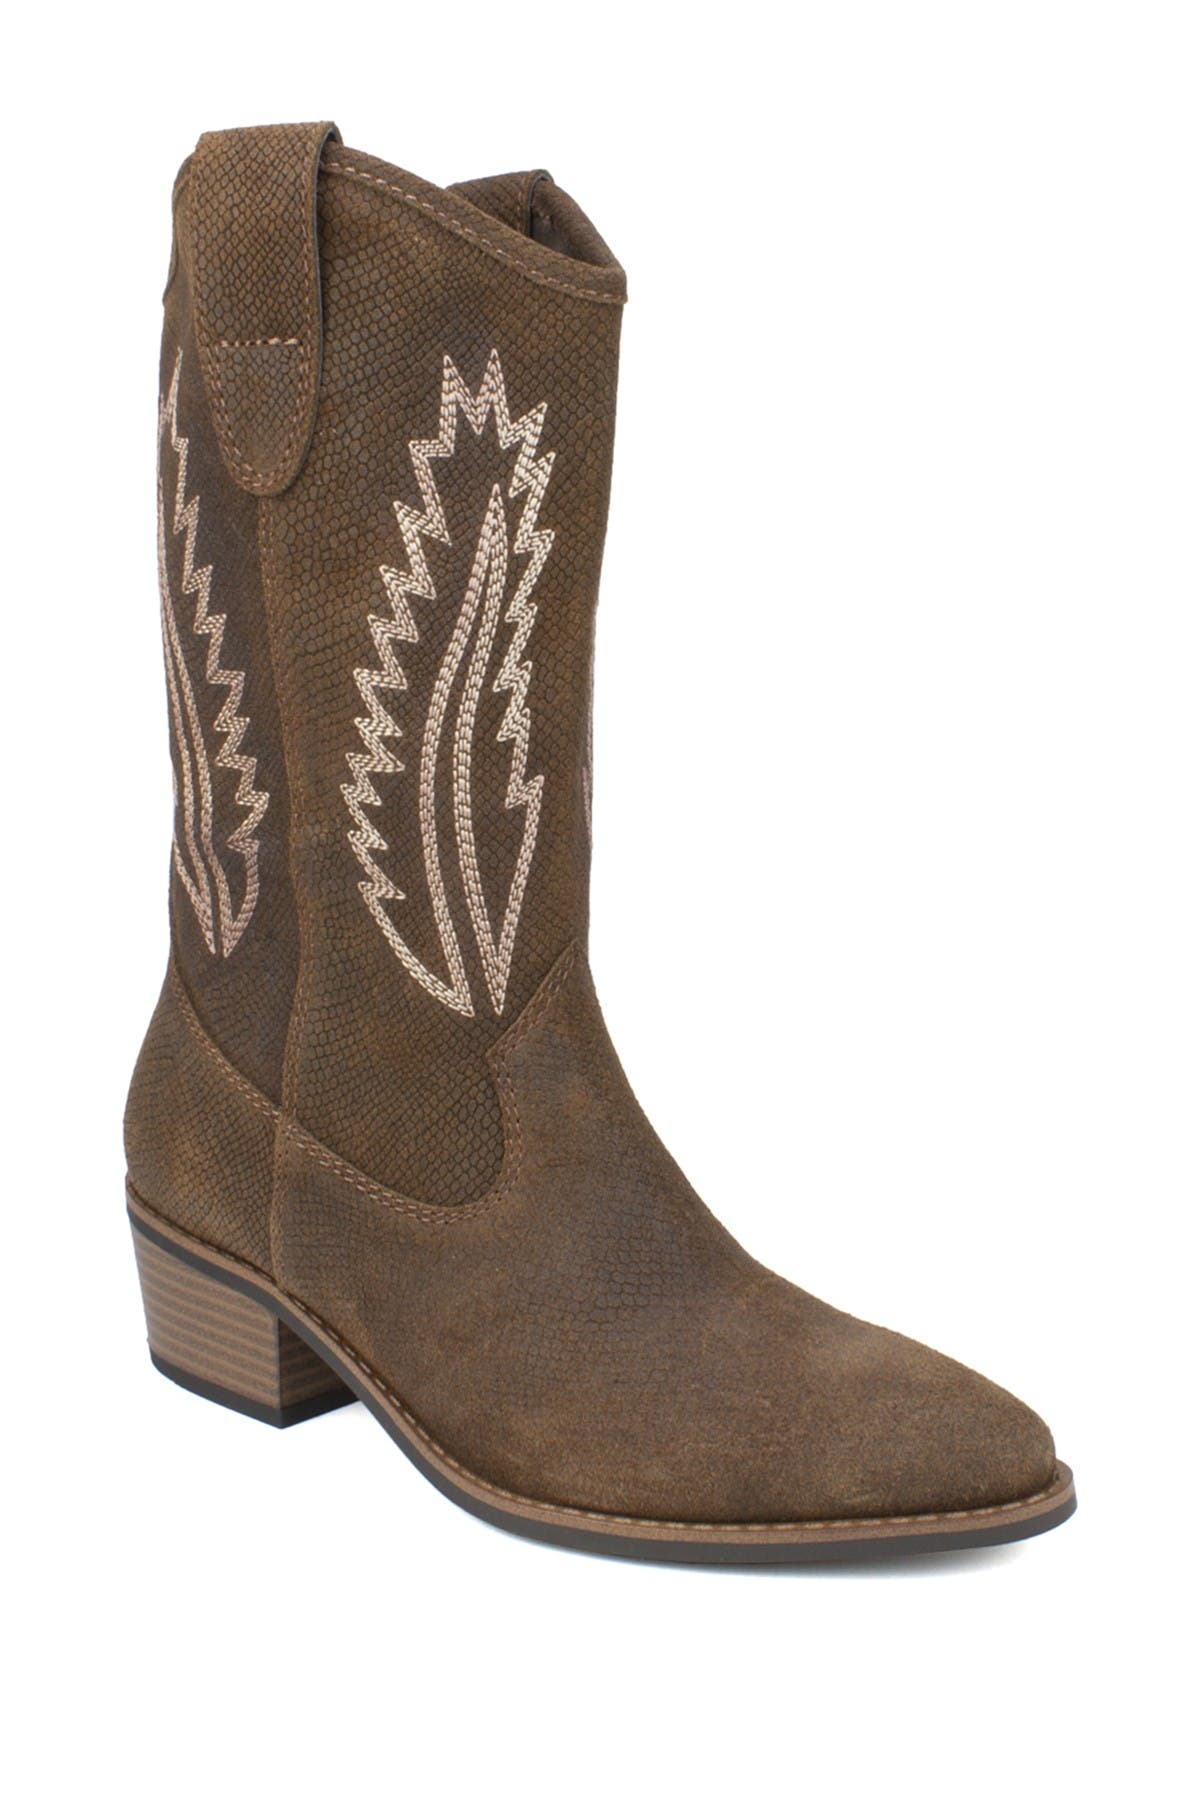 Caraway Leather Western Cowboy Boot 